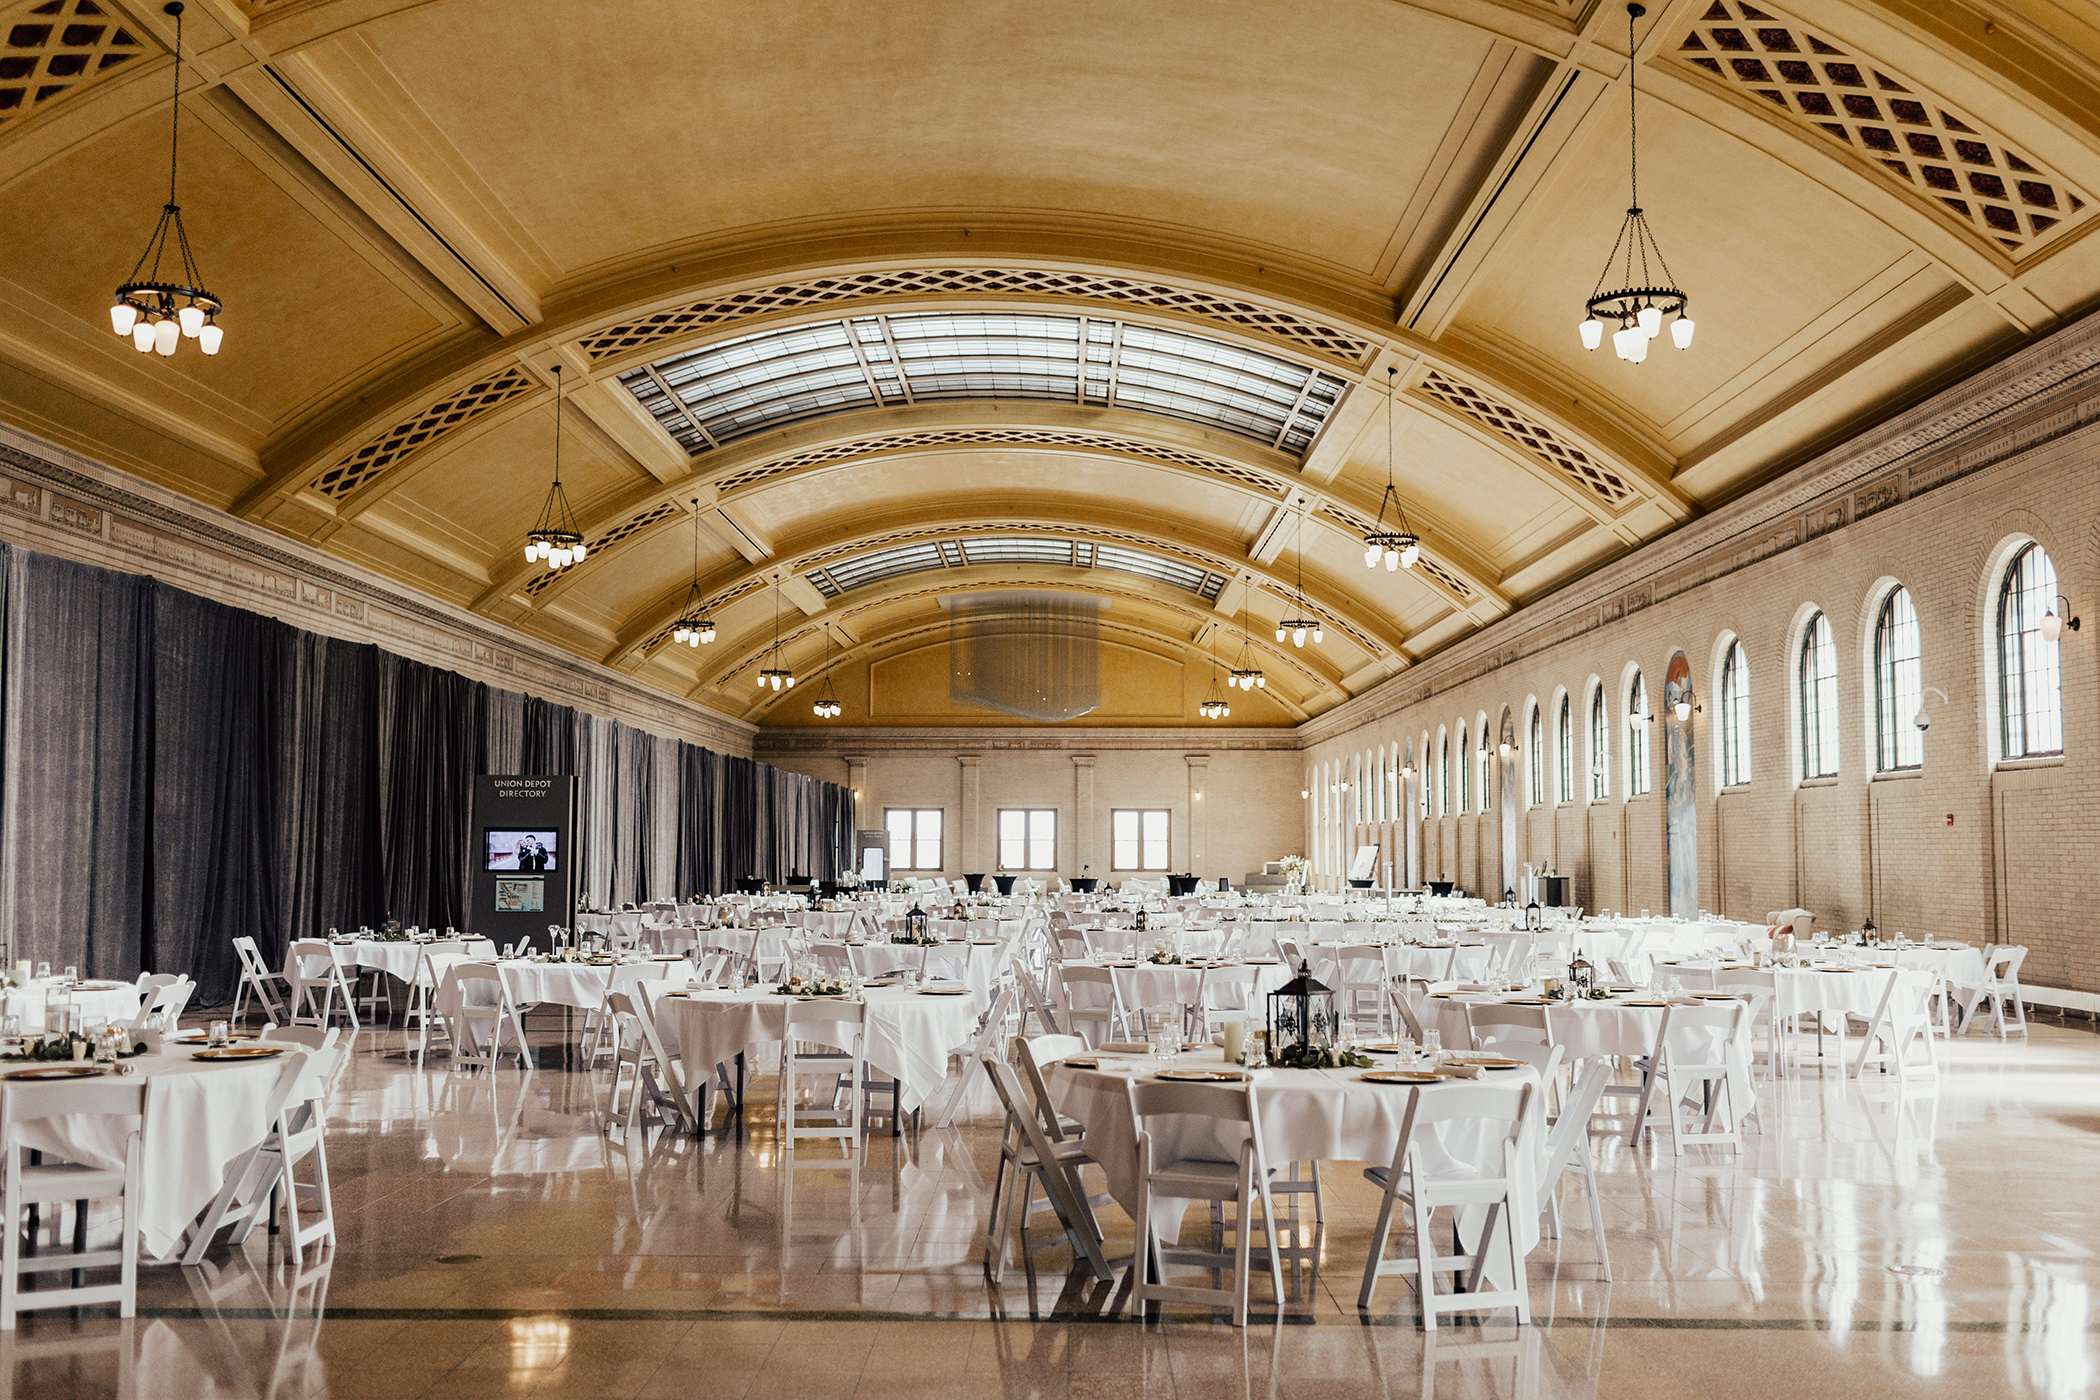 A private event setup in the Union Depot Waiting Room